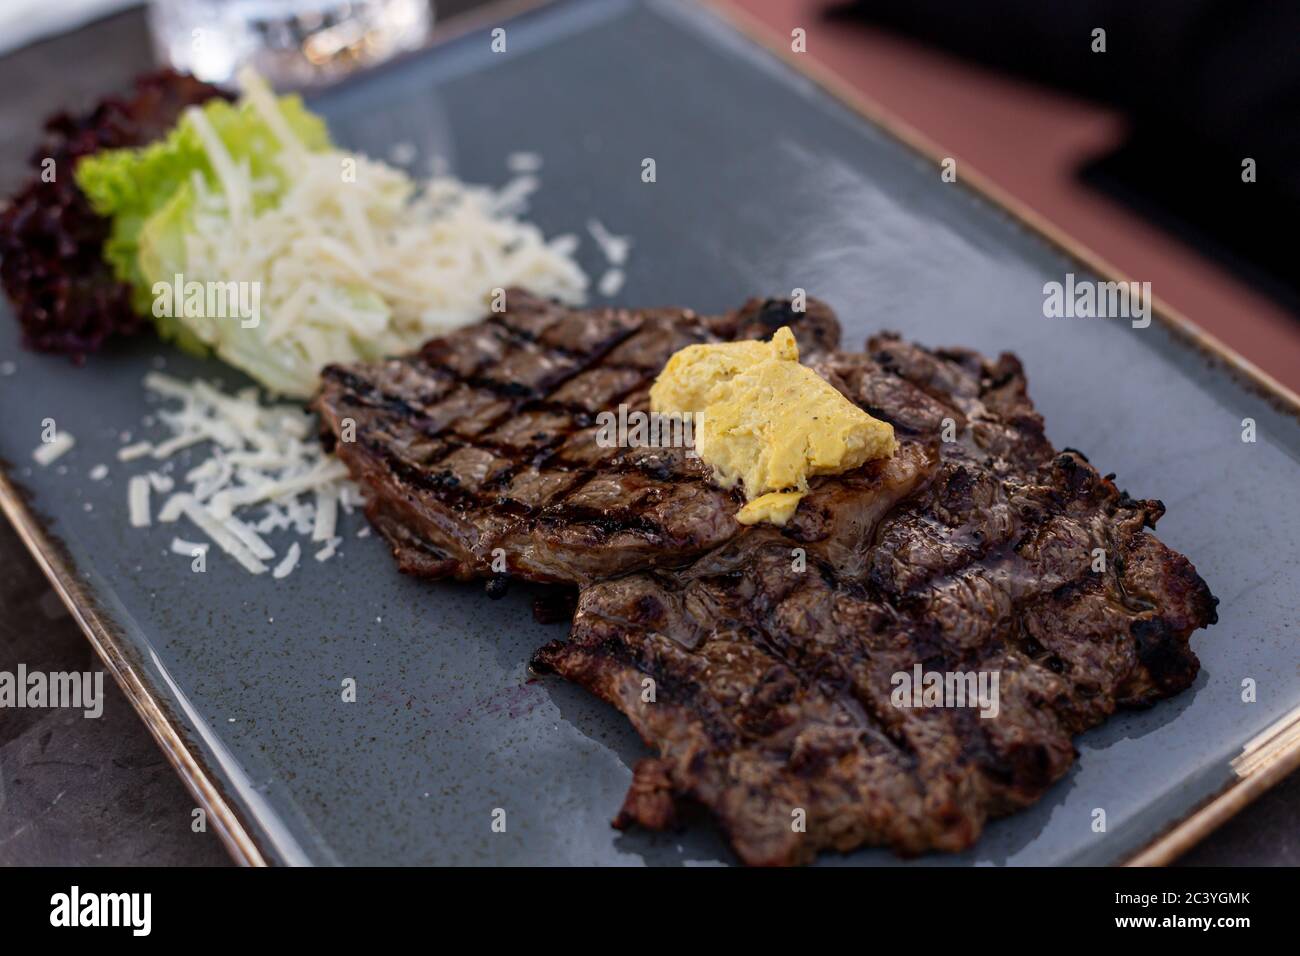 Delicious grilled steak on a blue ceramic stoneware. Stock Photo